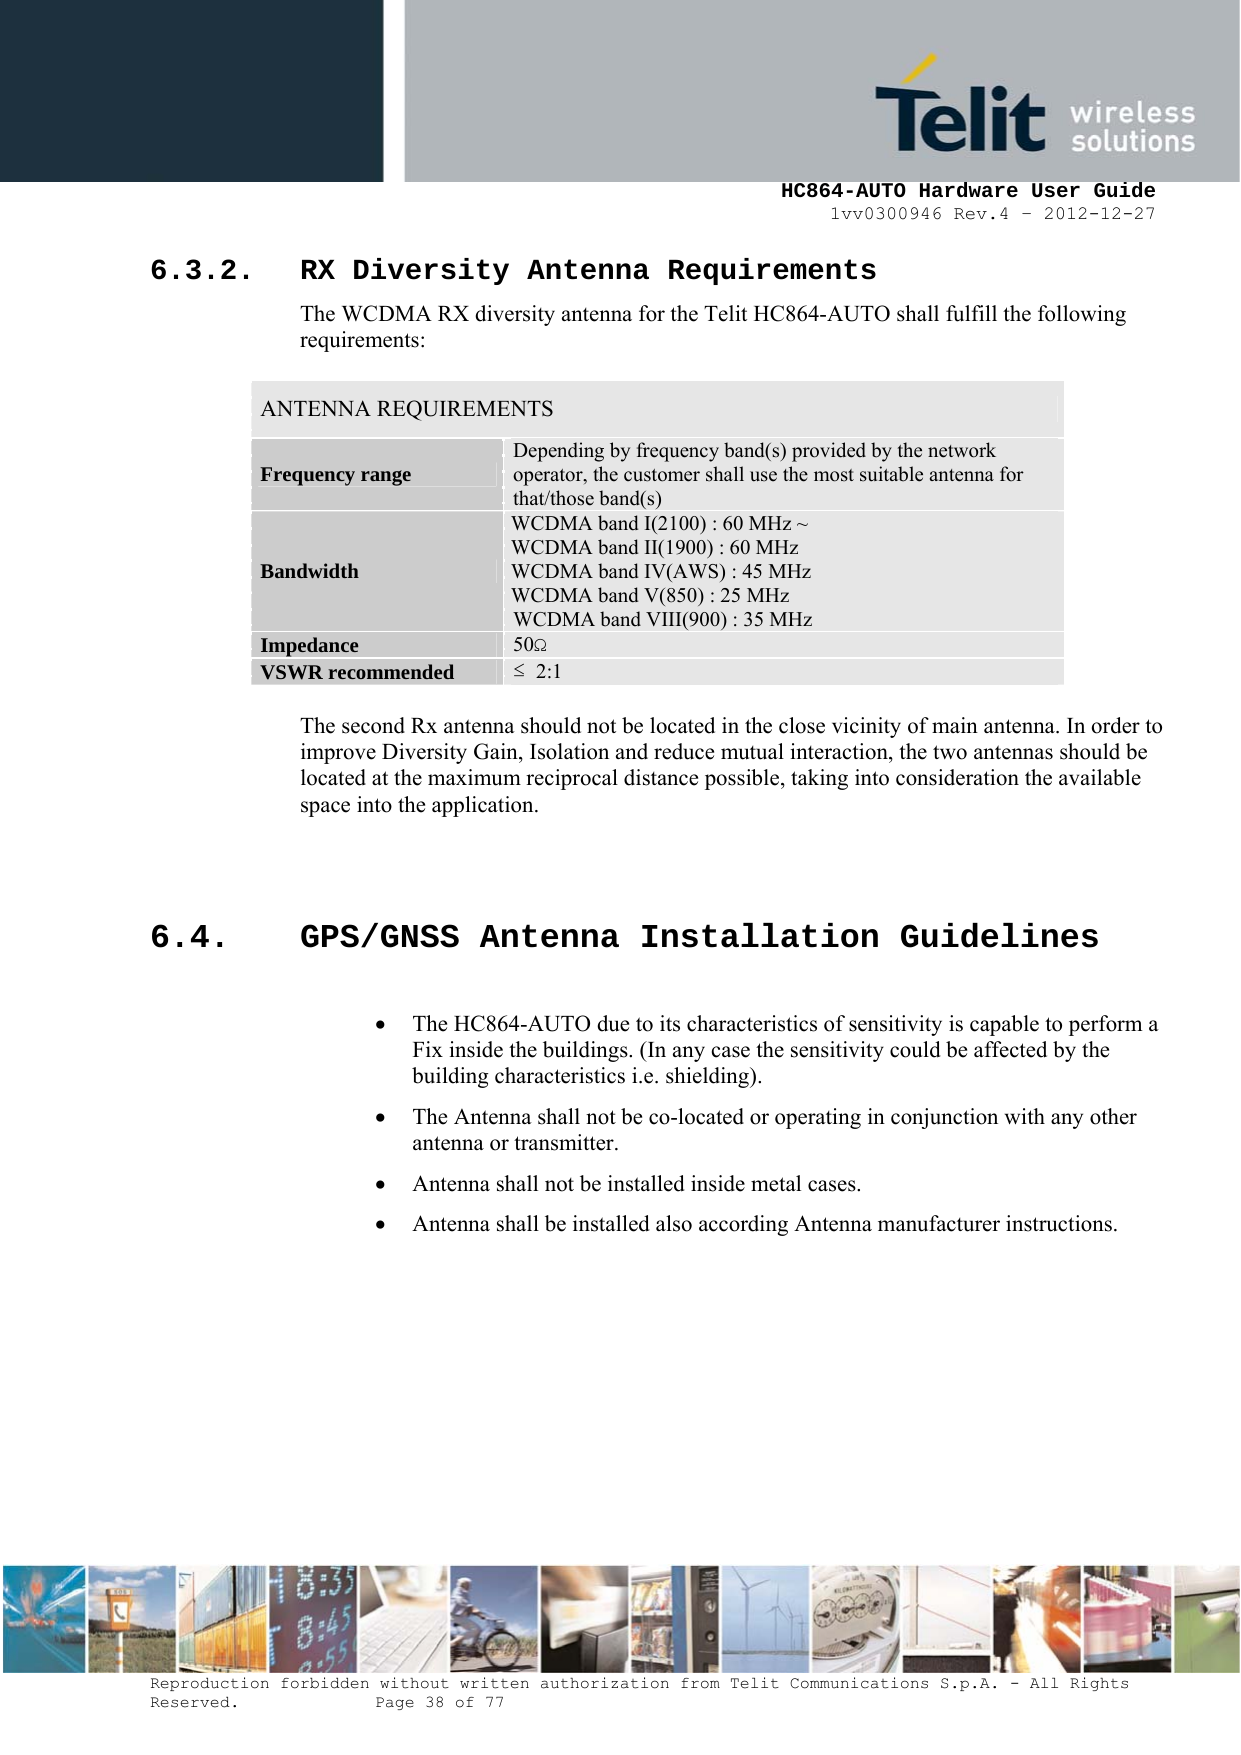     HC864-AUTO Hardware User Guide 1vv0300946 Rev.4 – 2012-12-27 Reproduction forbidden without written authorization from Telit Communications S.p.A. - All Rights Reserved.    Page 38 of 77  6.3.2. RX Diversity Antenna Requirements The WCDMA RX diversity antenna for the Telit HC864-AUTO shall fulfill the following requirements:   ANTENNA REQUIREMENTS Frequency range  Depending by frequency band(s) provided by the network operator, the customer shall use the most suitable antenna for that/those band(s) Bandwidth WCDMA band I(2100) : 60 MHz ~  WCDMA band II(1900) : 60 MHz WCDMA band IV(AWS) : 45 MHz WCDMA band V(850) : 25 MHz WCDMA band VIII(900) : 35 MHz Impedance  50Ω VSWR recommended  ≤  2:1  The second Rx antenna should not be located in the close vicinity of main antenna. In order to improve Diversity Gain, Isolation and reduce mutual interaction, the two antennas should be located at the maximum reciprocal distance possible, taking into consideration the available space into the application.   6.4. GPS/GNSS Antenna Installation Guidelines  • The HC864-AUTO due to its characteristics of sensitivity is capable to perform a Fix inside the buildings. (In any case the sensitivity could be affected by the building characteristics i.e. shielding). • The Antenna shall not be co-located or operating in conjunction with any other antenna or transmitter. • Antenna shall not be installed inside metal cases. • Antenna shall be installed also according Antenna manufacturer instructions. 